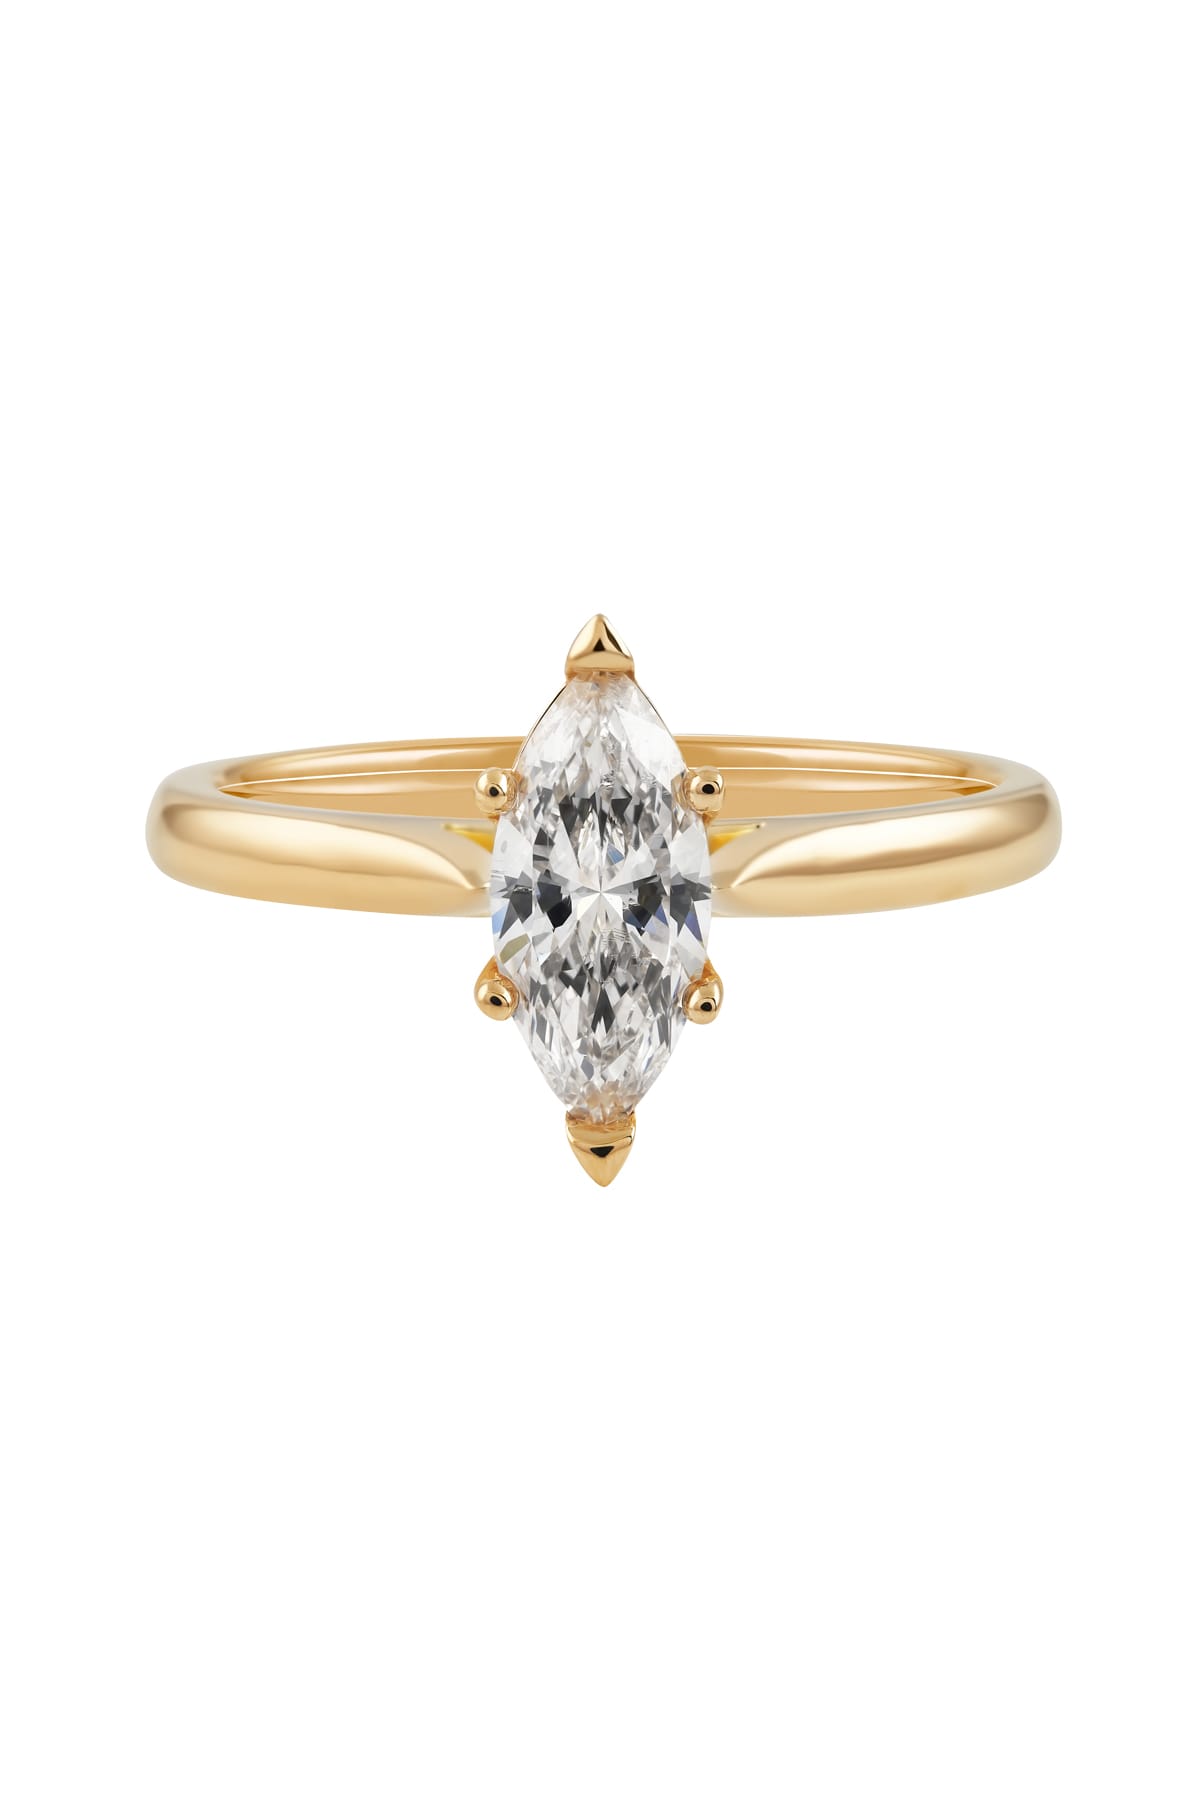 Marquise Solitaire 0.70 carat diamond engagement ring available at LeGassick Diamonds and Jewellery Gold Coast, Australia.